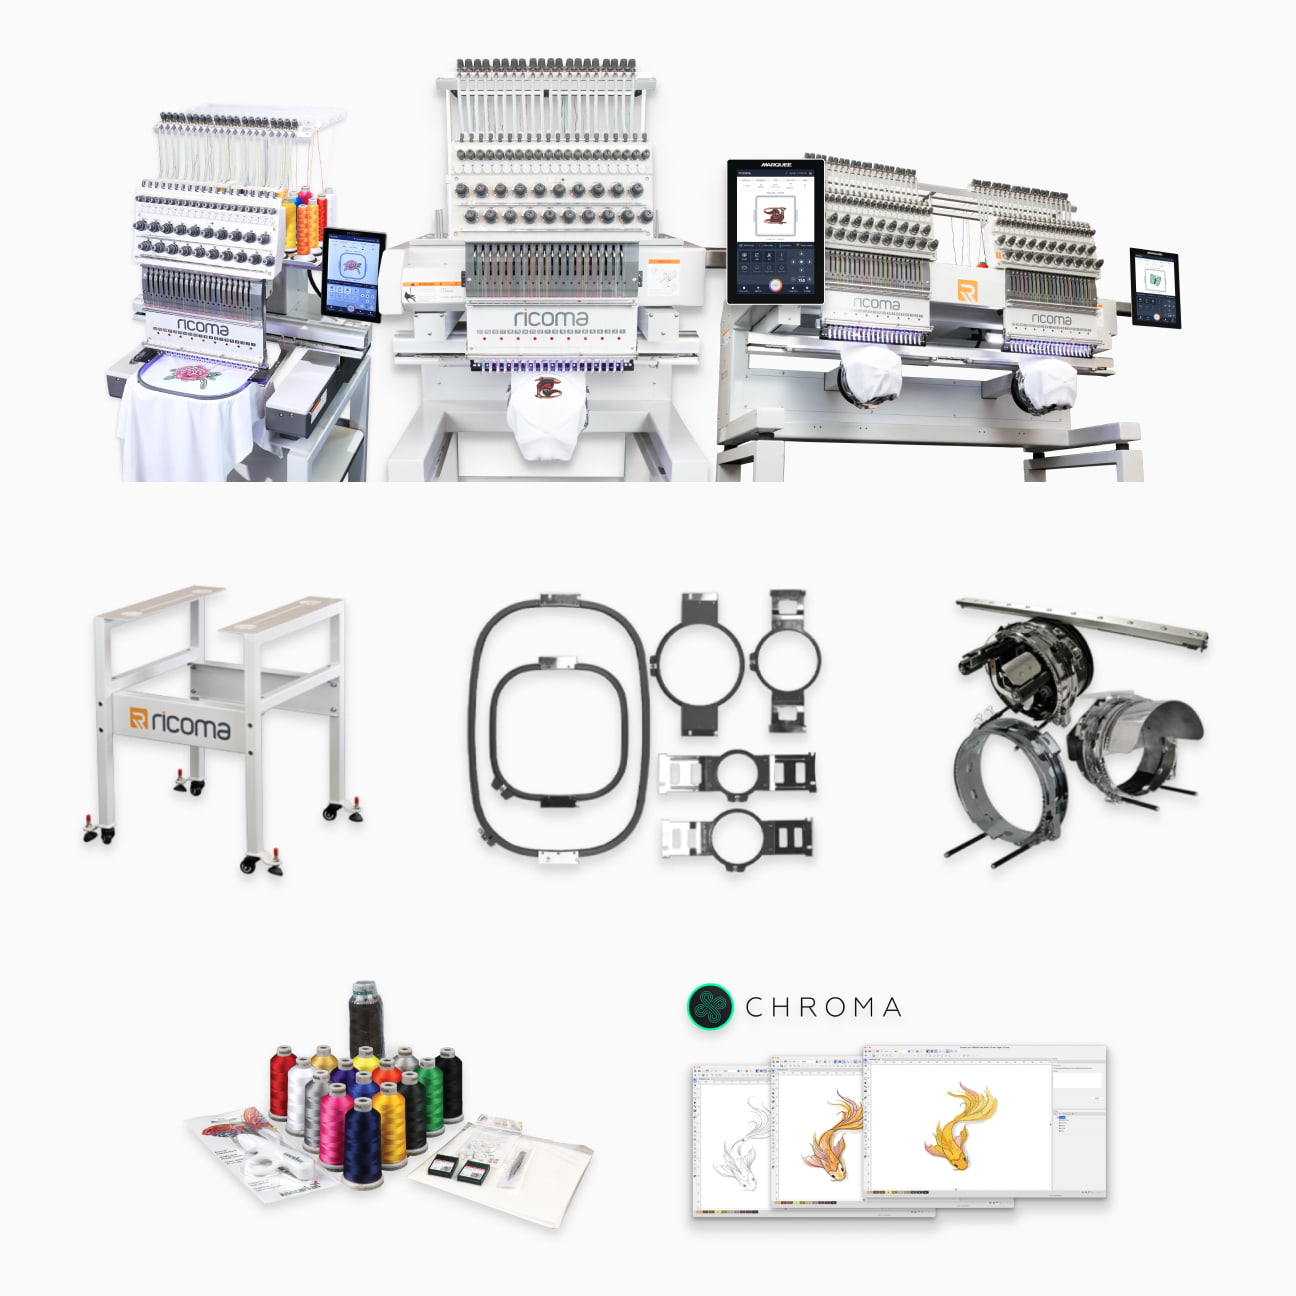 Embroidery machine (Choose from any of our models),Heavy-duty steel stand,Variety of hoops in different sizes for all types of embroidery projects,Cap driver assembly with cap rings to embroider caps,Embroidery starter kit with threads, needles, backing and more,Chroma Inspire digitizing software 